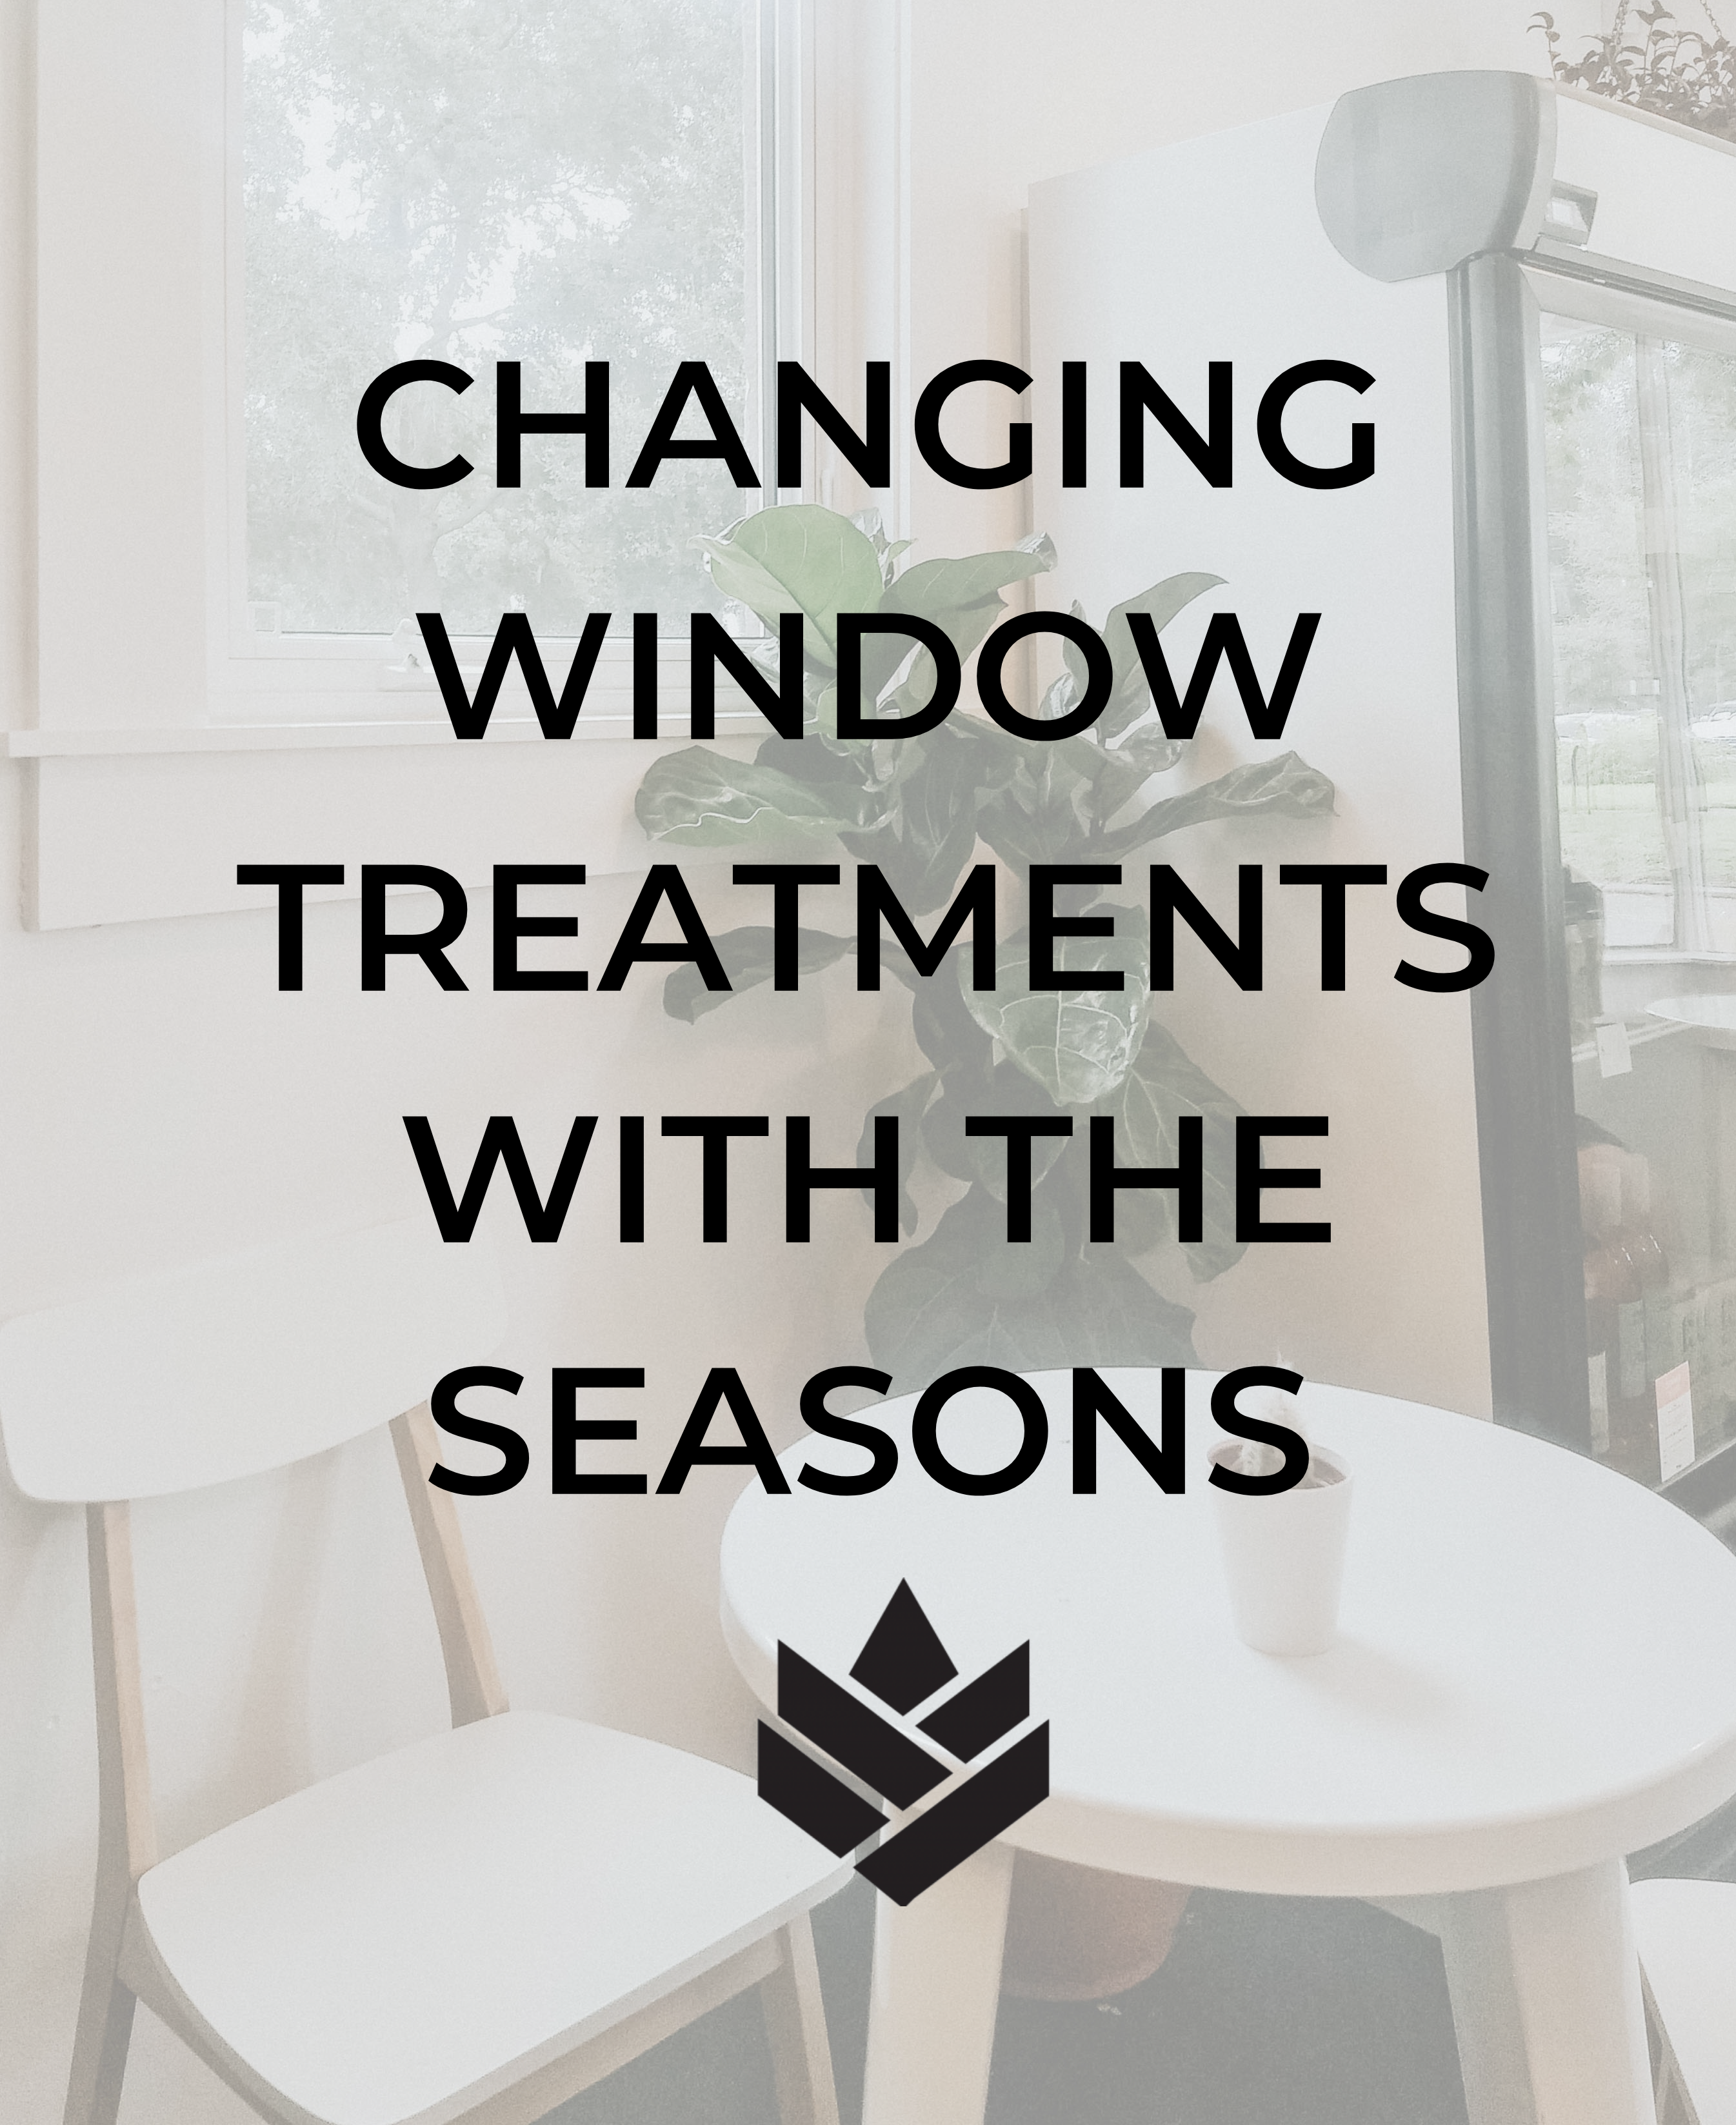 Changing Window Treatments with the Seasons